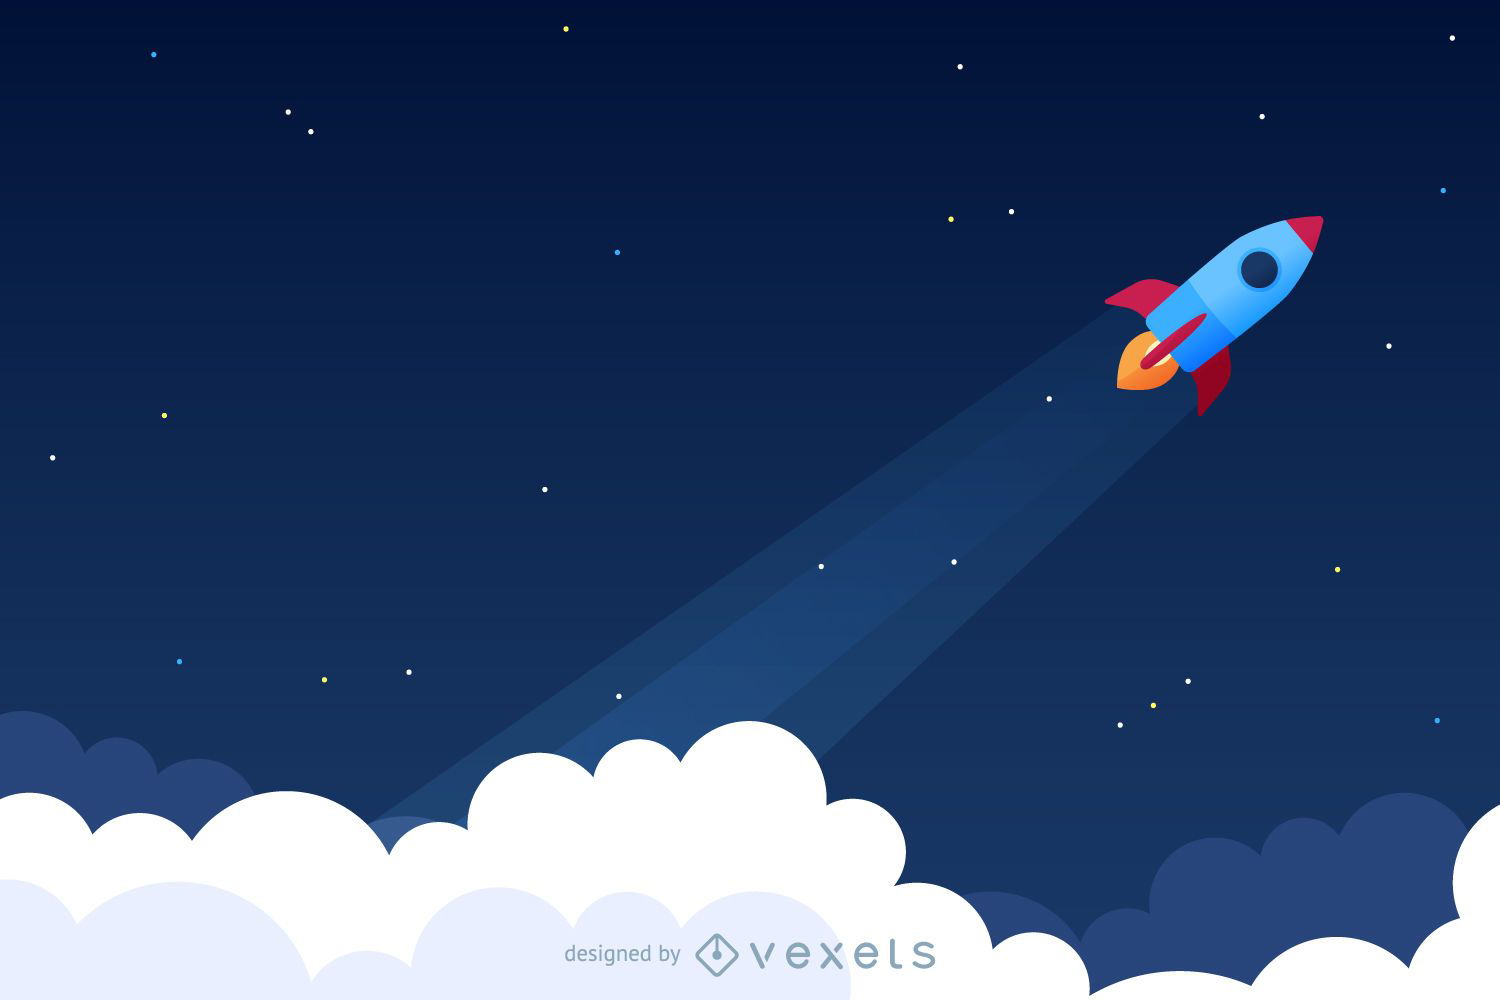 Rocket launching into space illustration